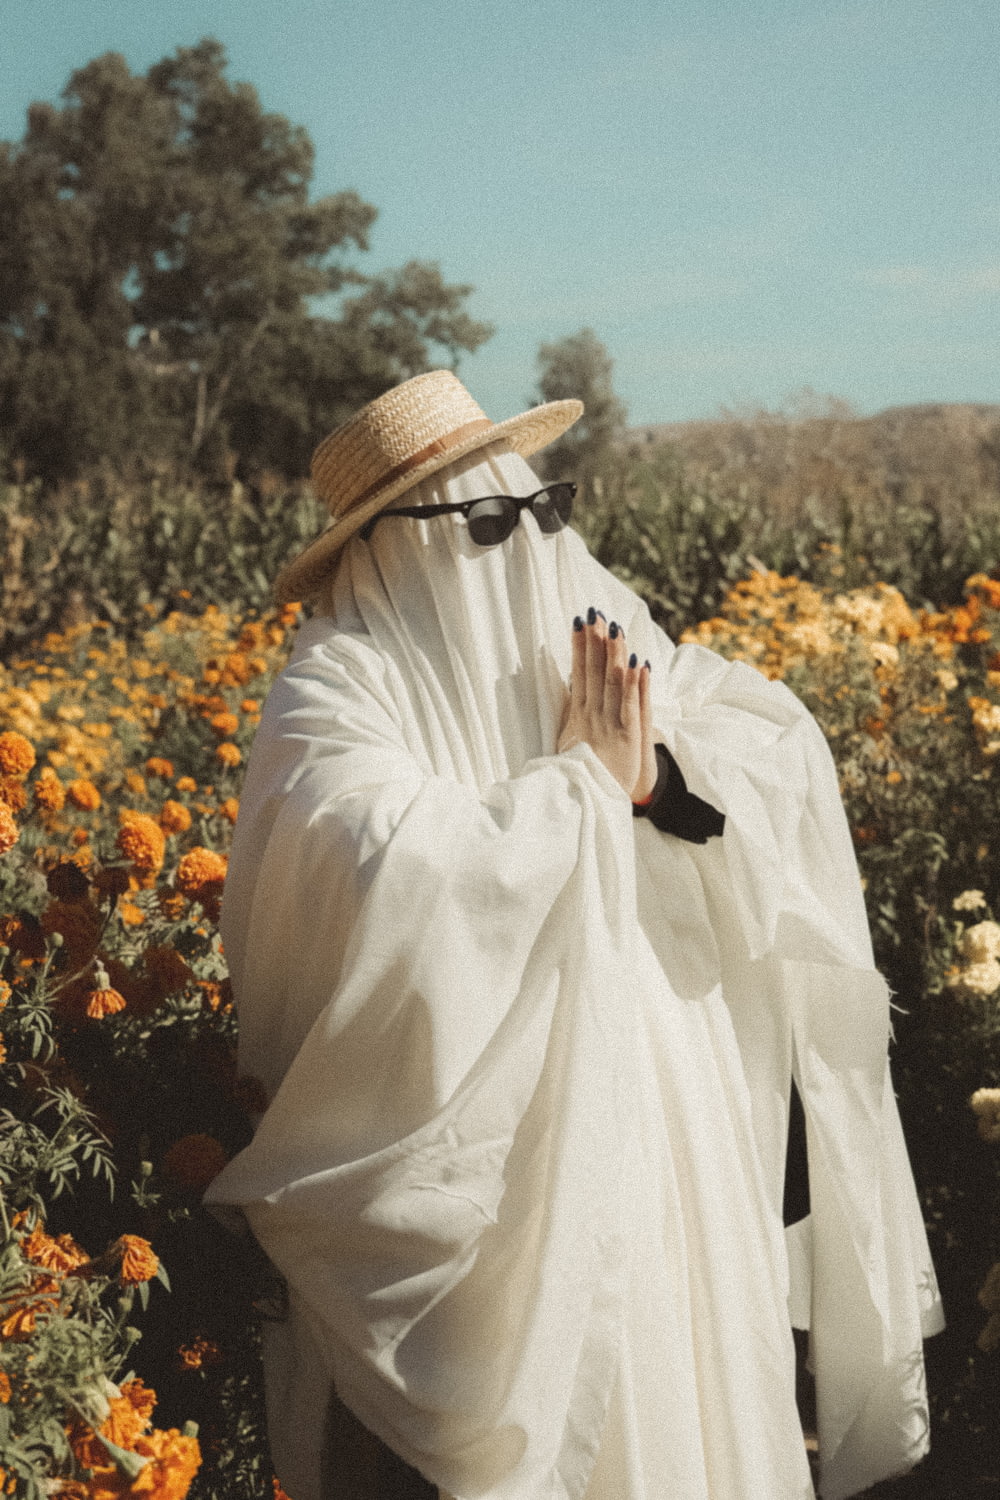 a person in a white robe and hat in a field of flowers